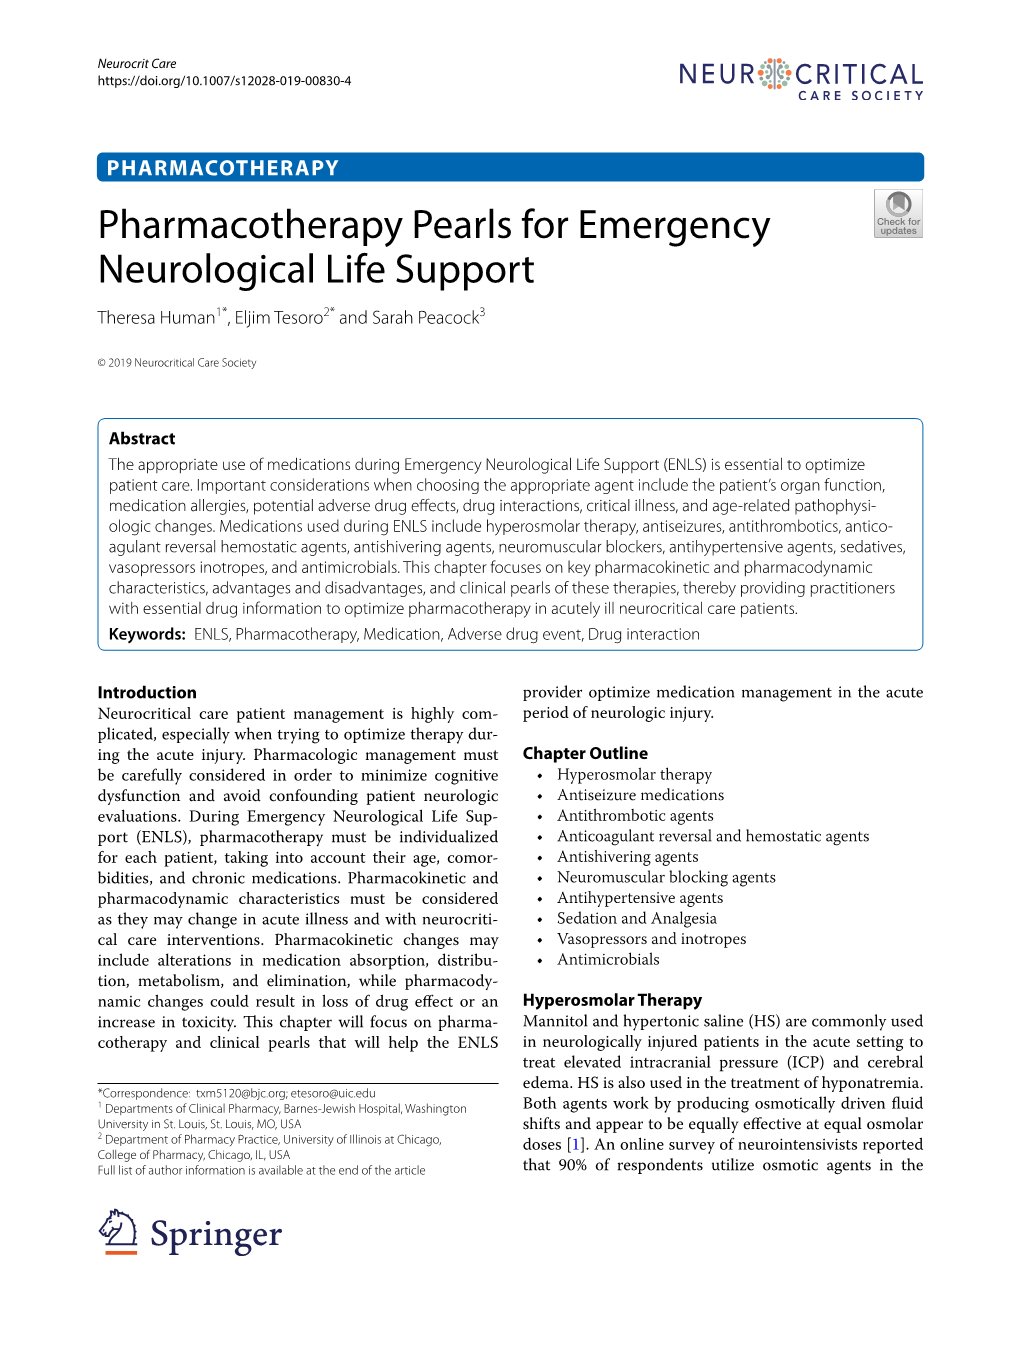 Pharmacotherapy Pearls for Emergency Neurological Life Support Theresa Human1*, Eljim Tesoro2* and Sarah Peacock3